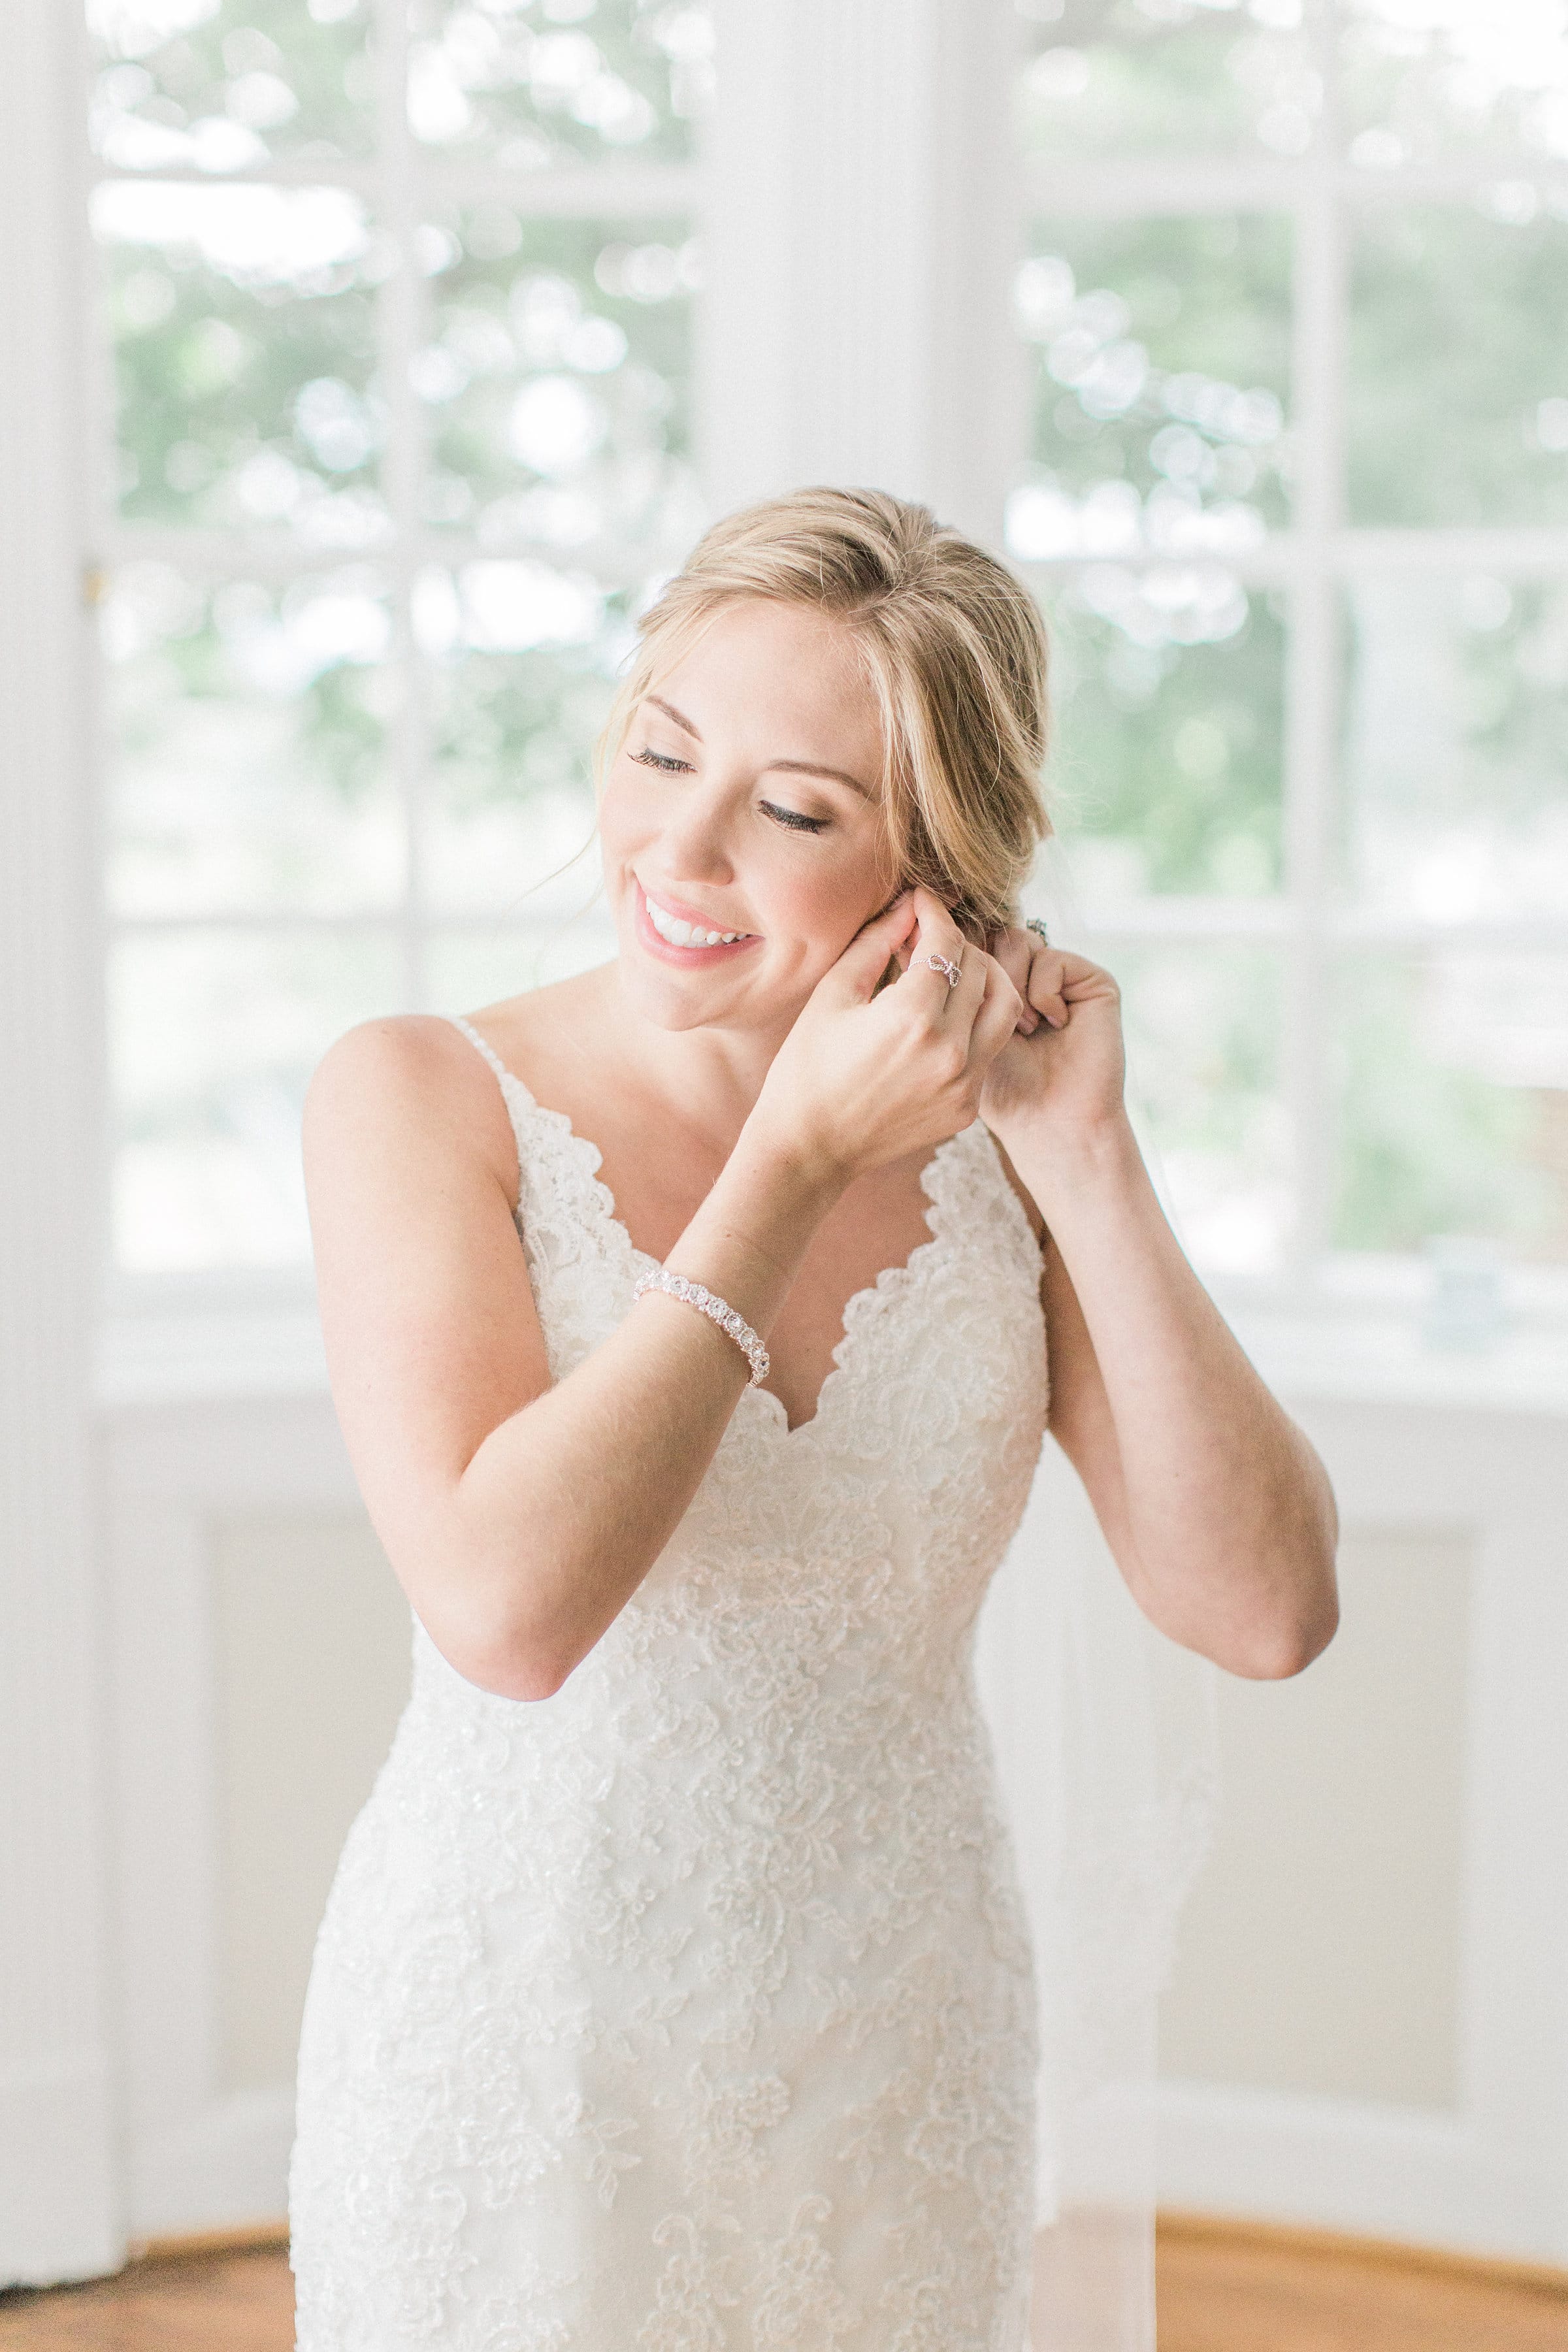 Real wedding Featuring Rebecca Ingram bride wearing Drew. This #rebeccabride had both parents walk her down the aisle!